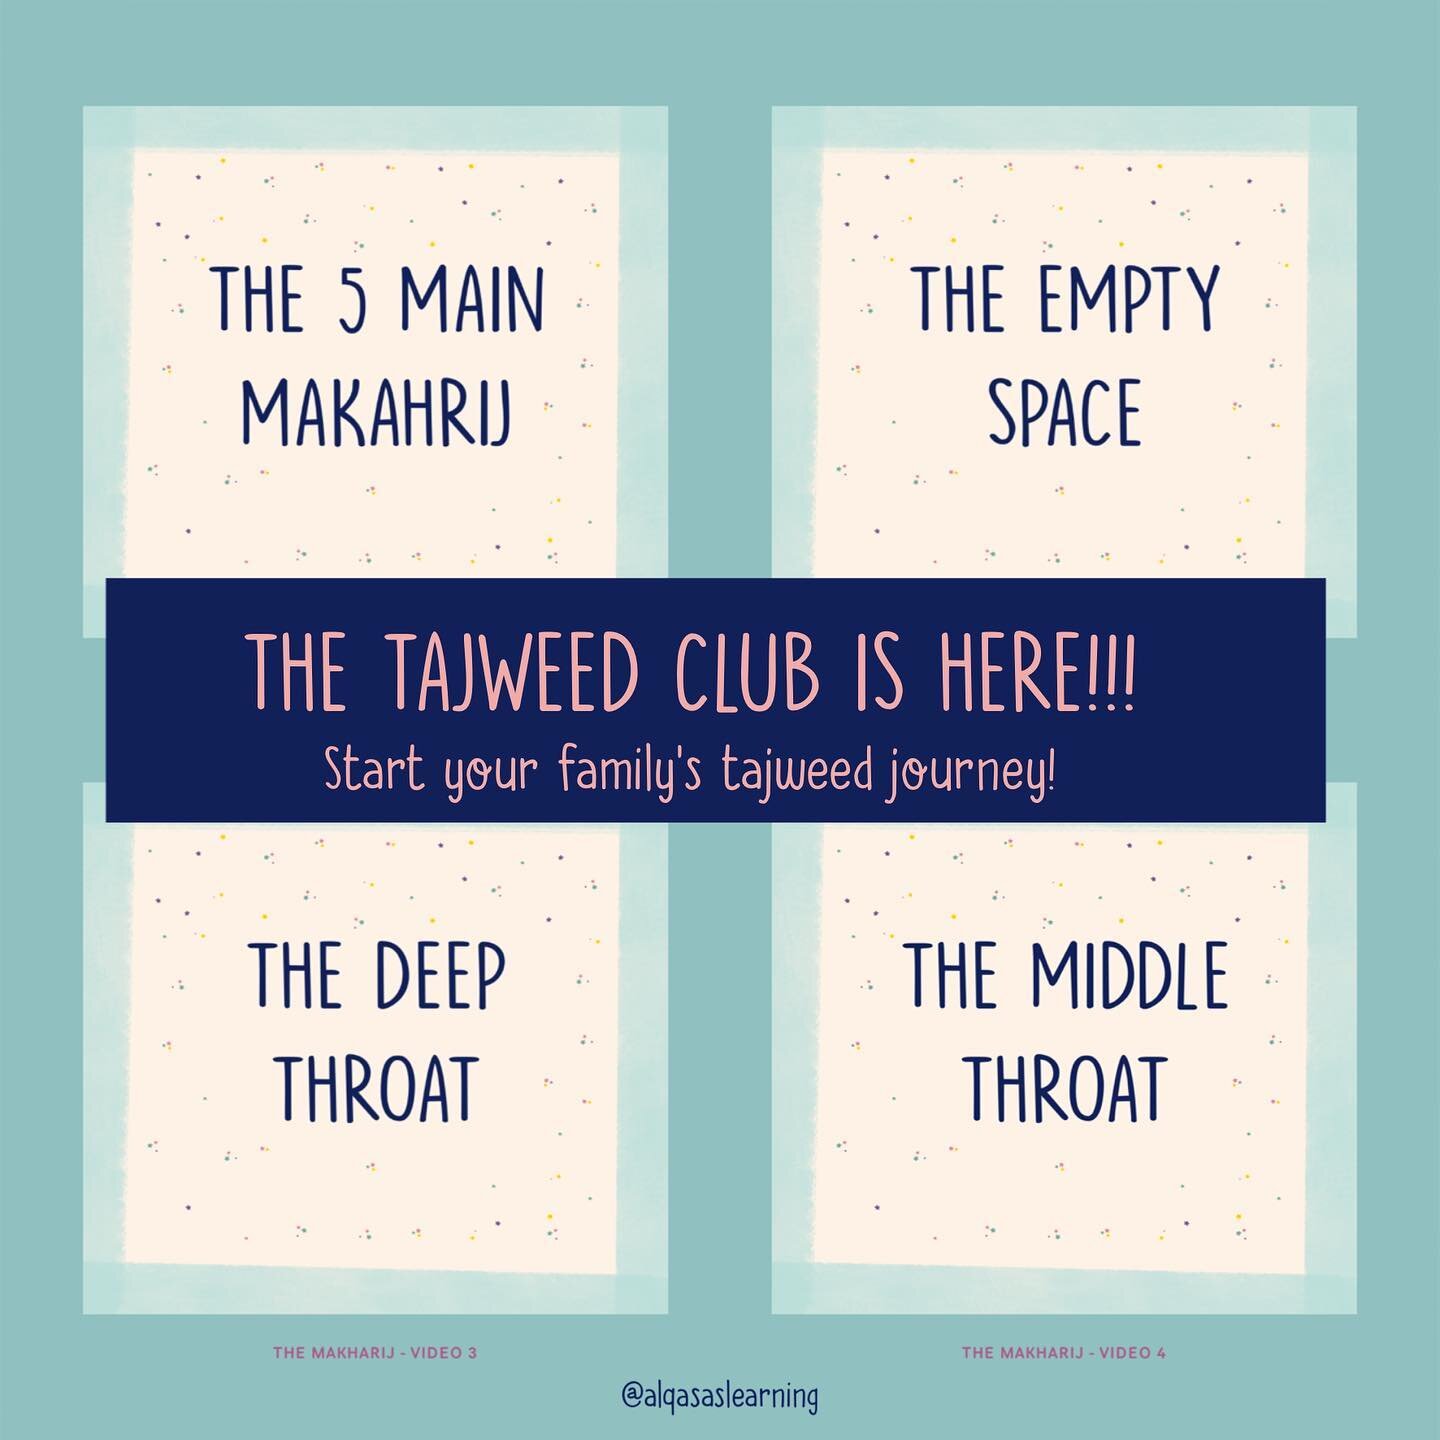 A common question in my DMs is do you teach tajweed to childre? Unfortunately up until now I have had to say NO as I have been focusing on teaching my family in Norway. 

Alhamdulillah, I am so excited to announce THE TAJWEED CLUB IS LIVE. Help your 